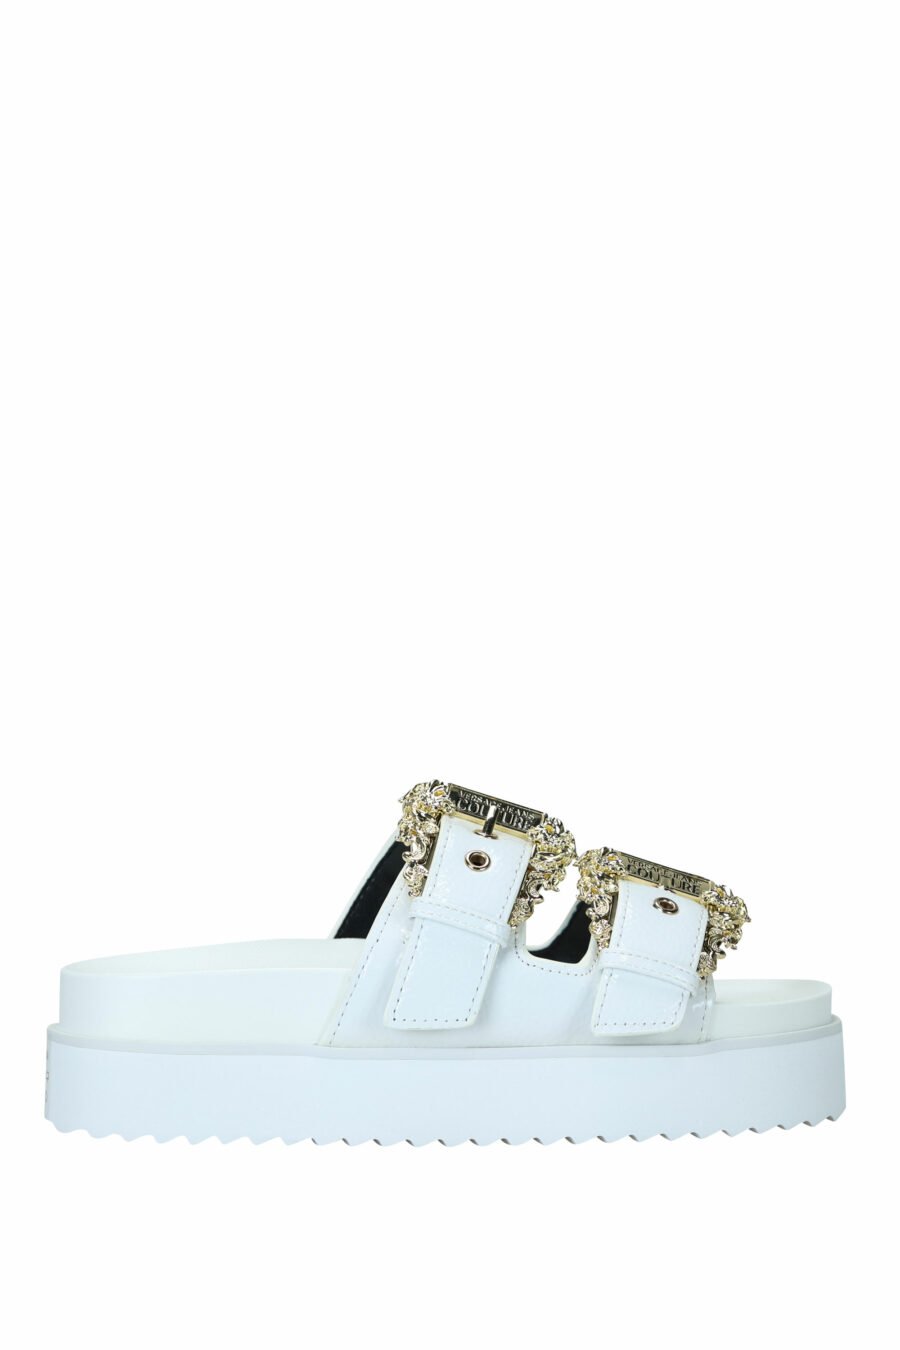 White sandals with gold baroque double buckle - 8052019607314